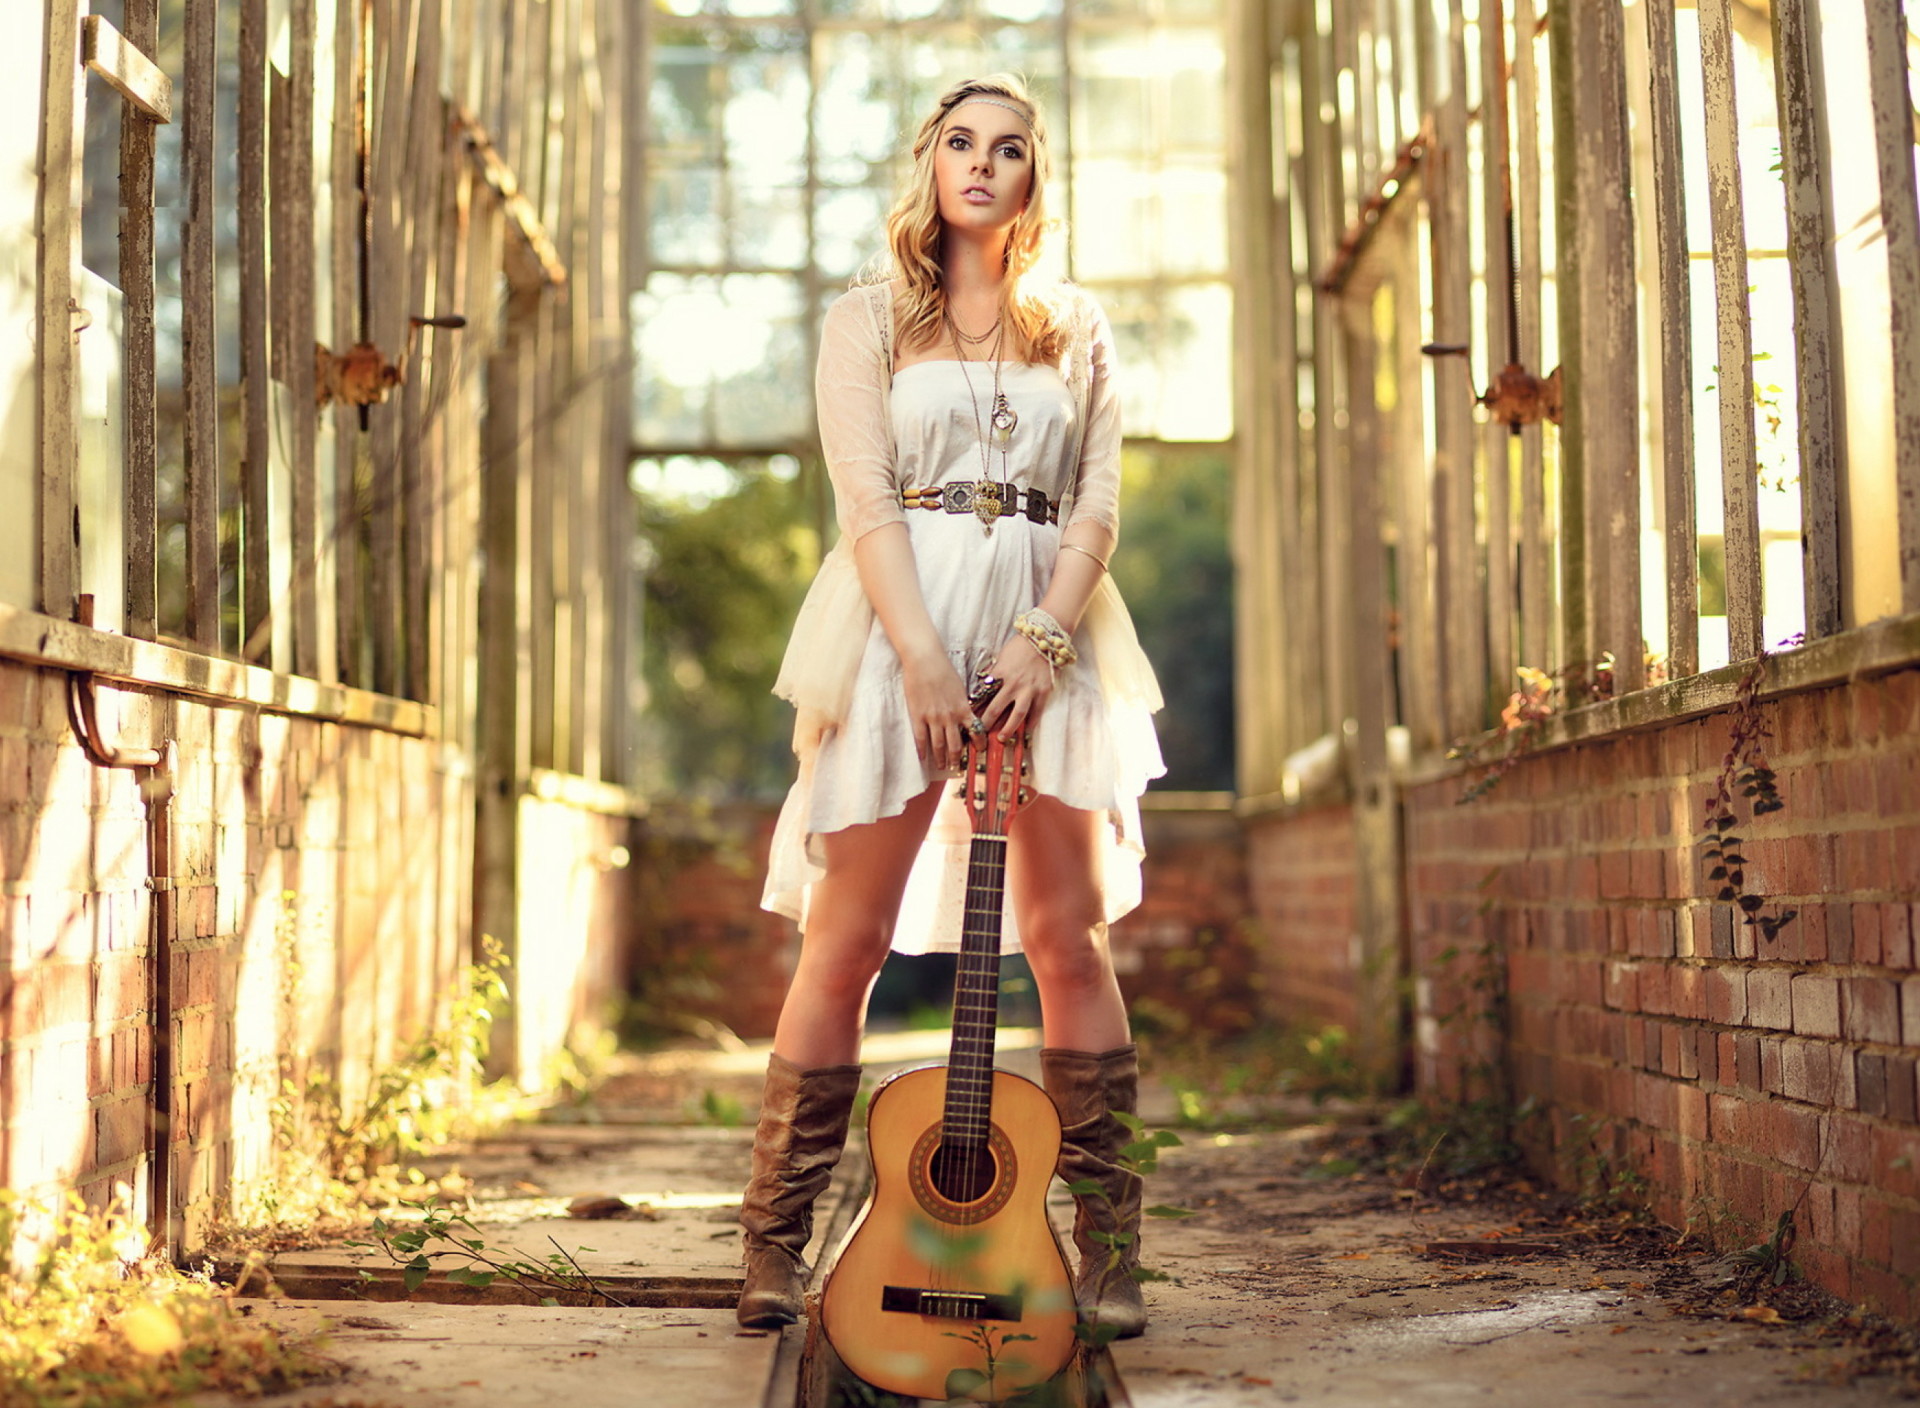 1920x1408 Girl With Guitar Chic Country Style Images .